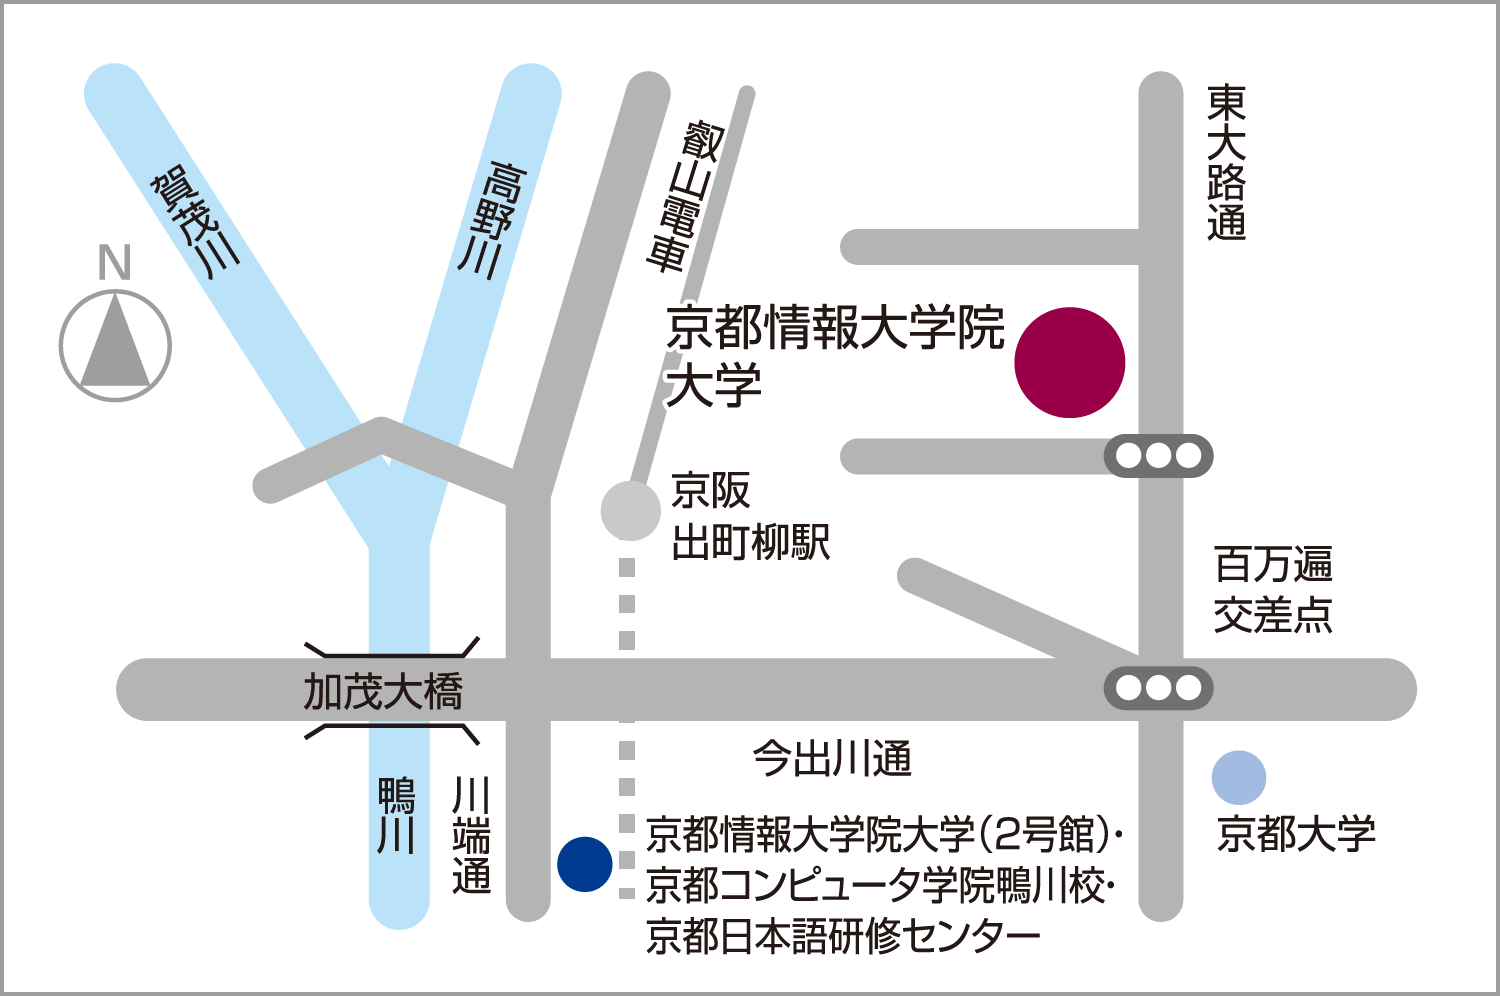 Kyoto College of Graduate Studies for Informatics Hyakumaben Campus and Kyoto College of Graduate Studies for Informatics Building no. 2 map